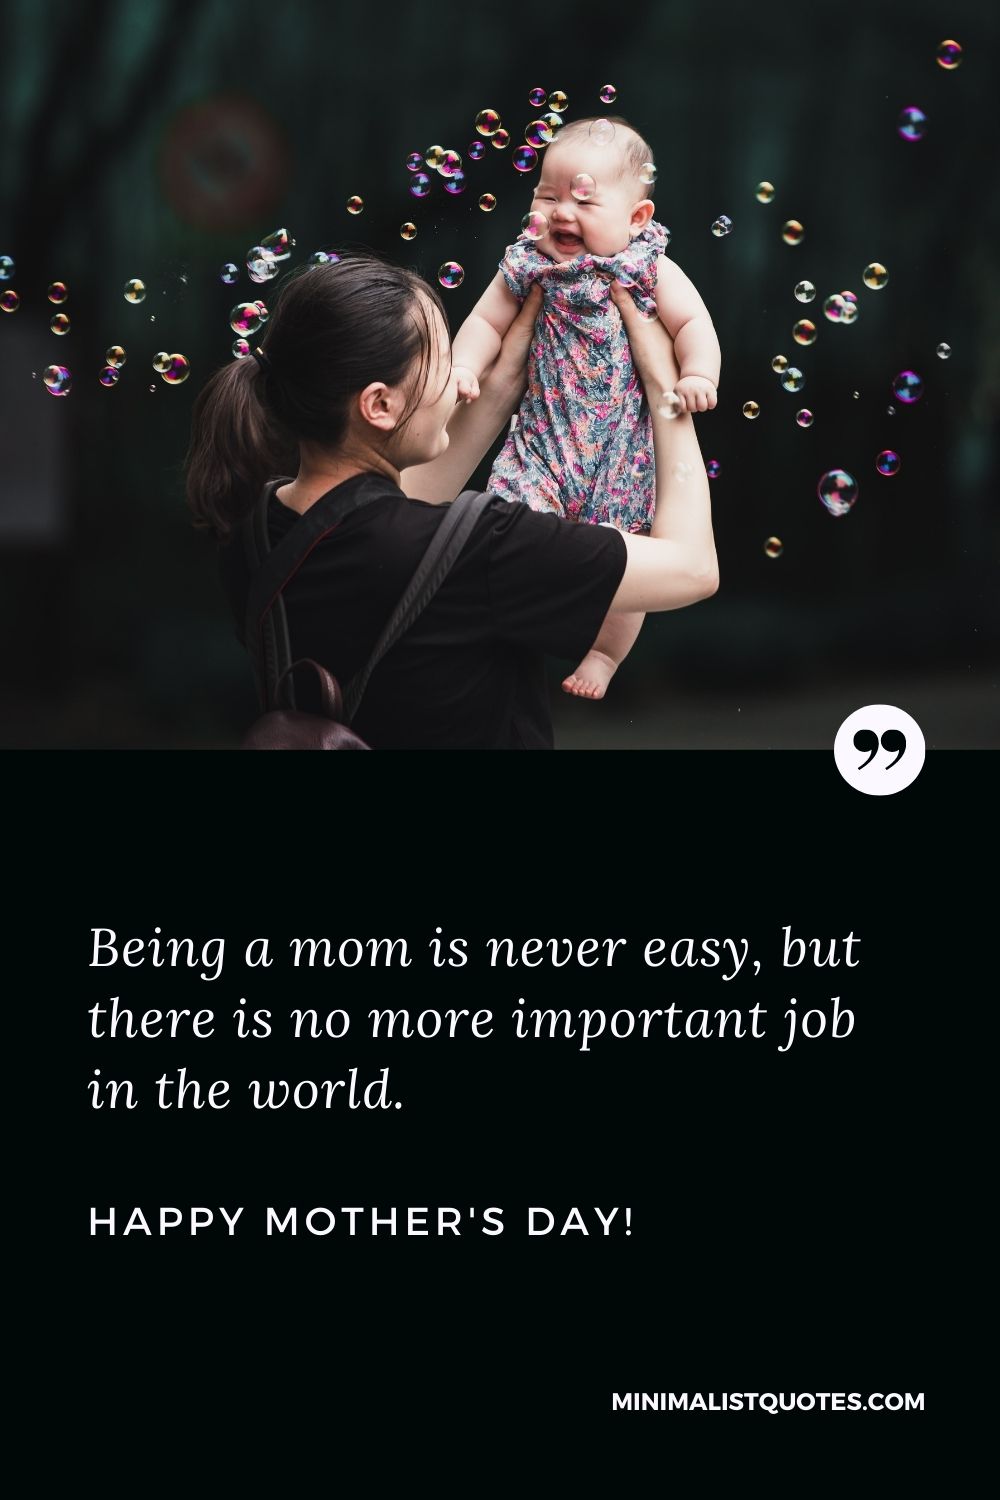 Being a mom is never easy, but there is no more important job in ...